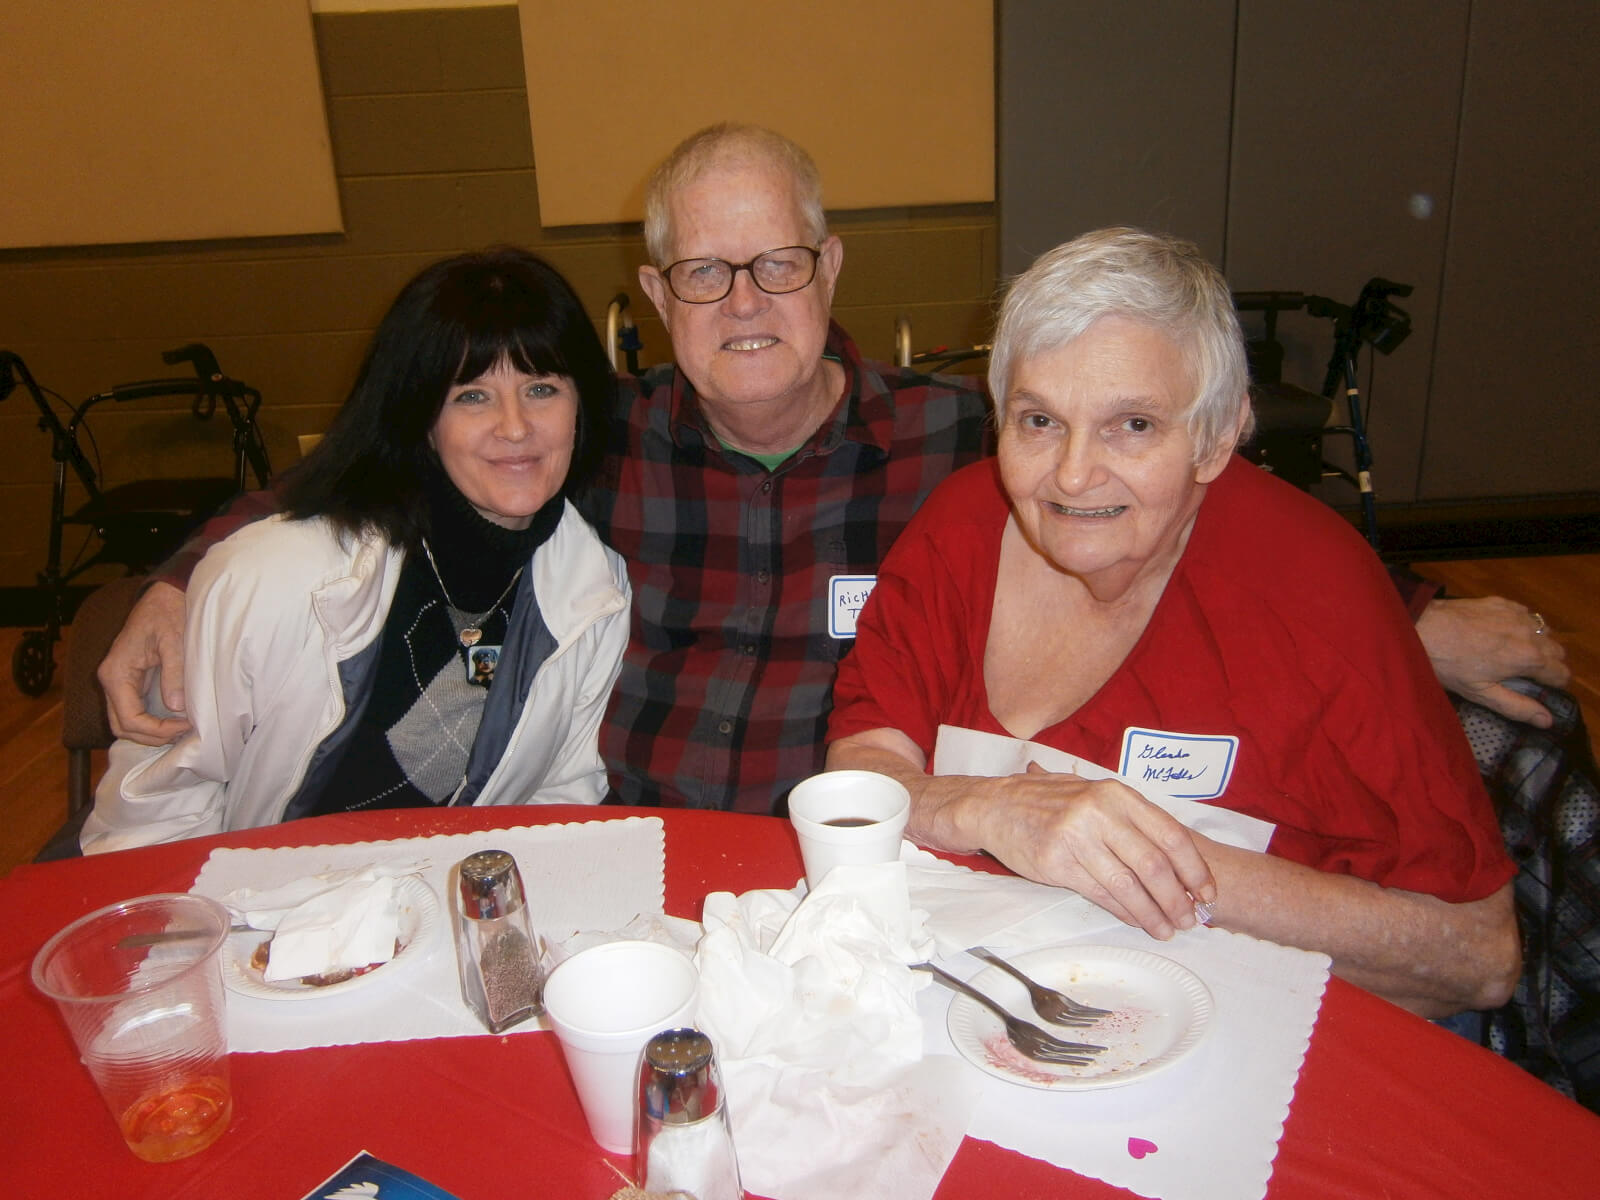 Wexford House Personal Care Assistant Ginny Brown with residents Rick Taylor and Glenda McFalls